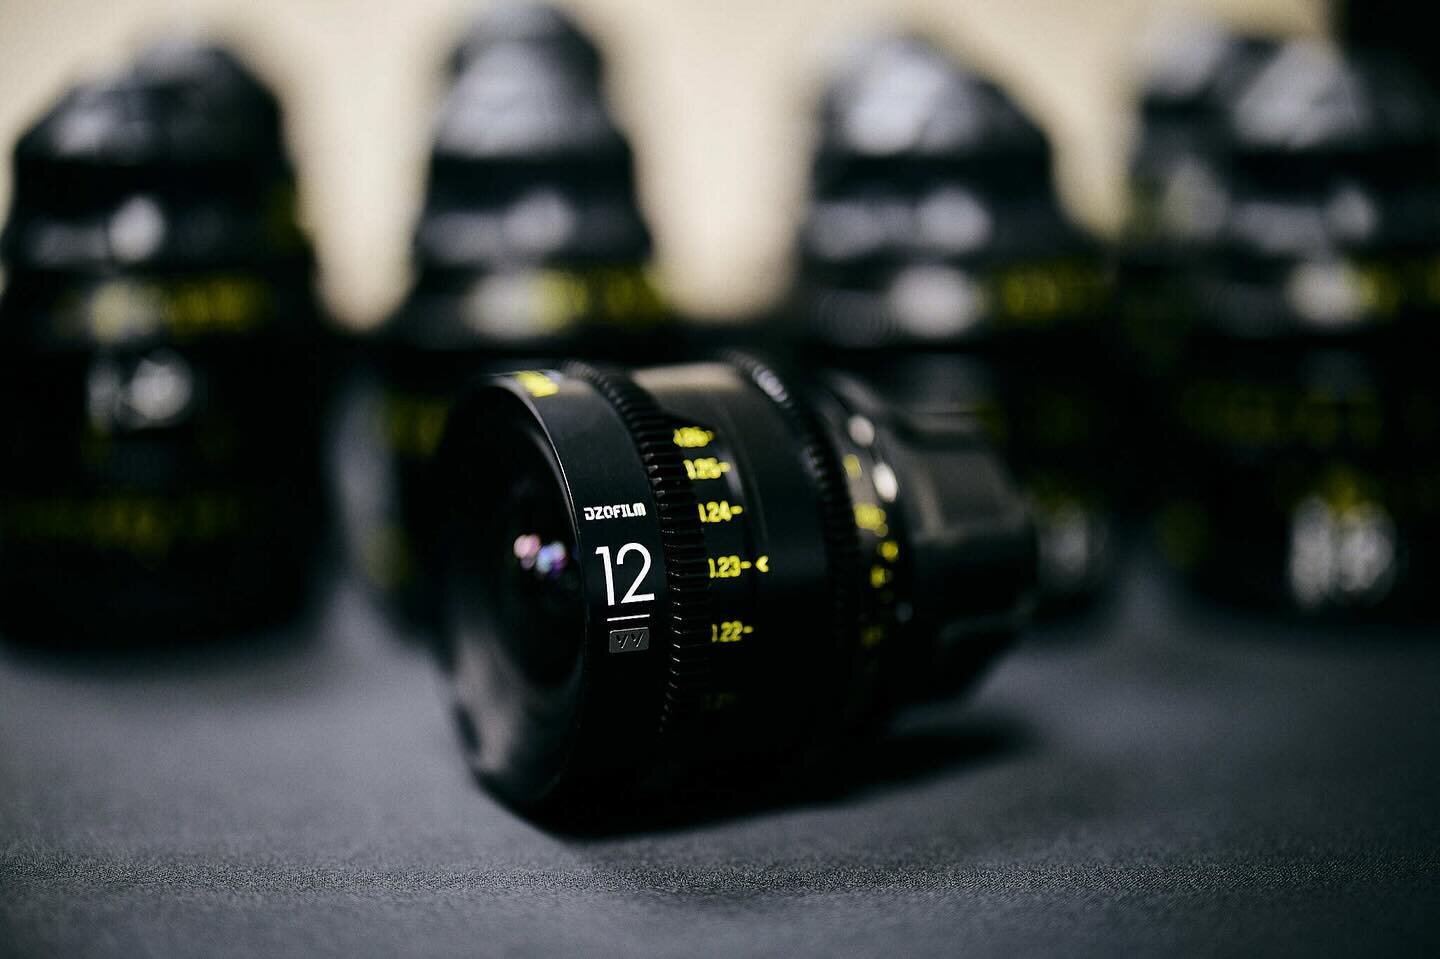 Our set of @dzofilm Vespid Prime is now a set of 9 lenses!  The new 12mm joins the 16, 25, 35, 50, 75, 100, 125mm to provide a wide range of coverage, in addition to the 90mm macro. 

#dzofilm #vespidprime